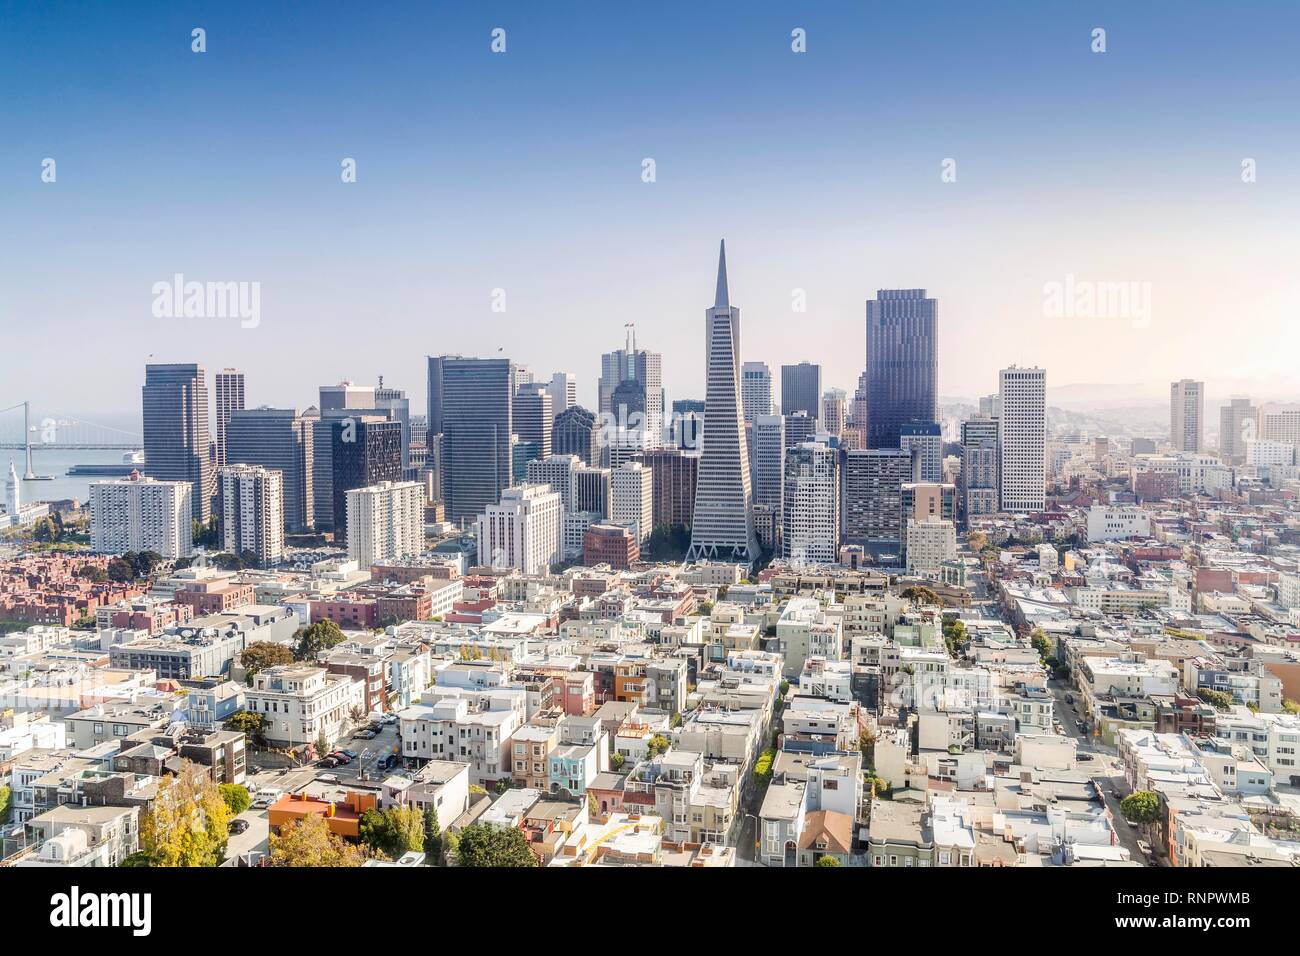 Skyline, downtown with business and residential district, San Francisco, California, USA Stock Photo